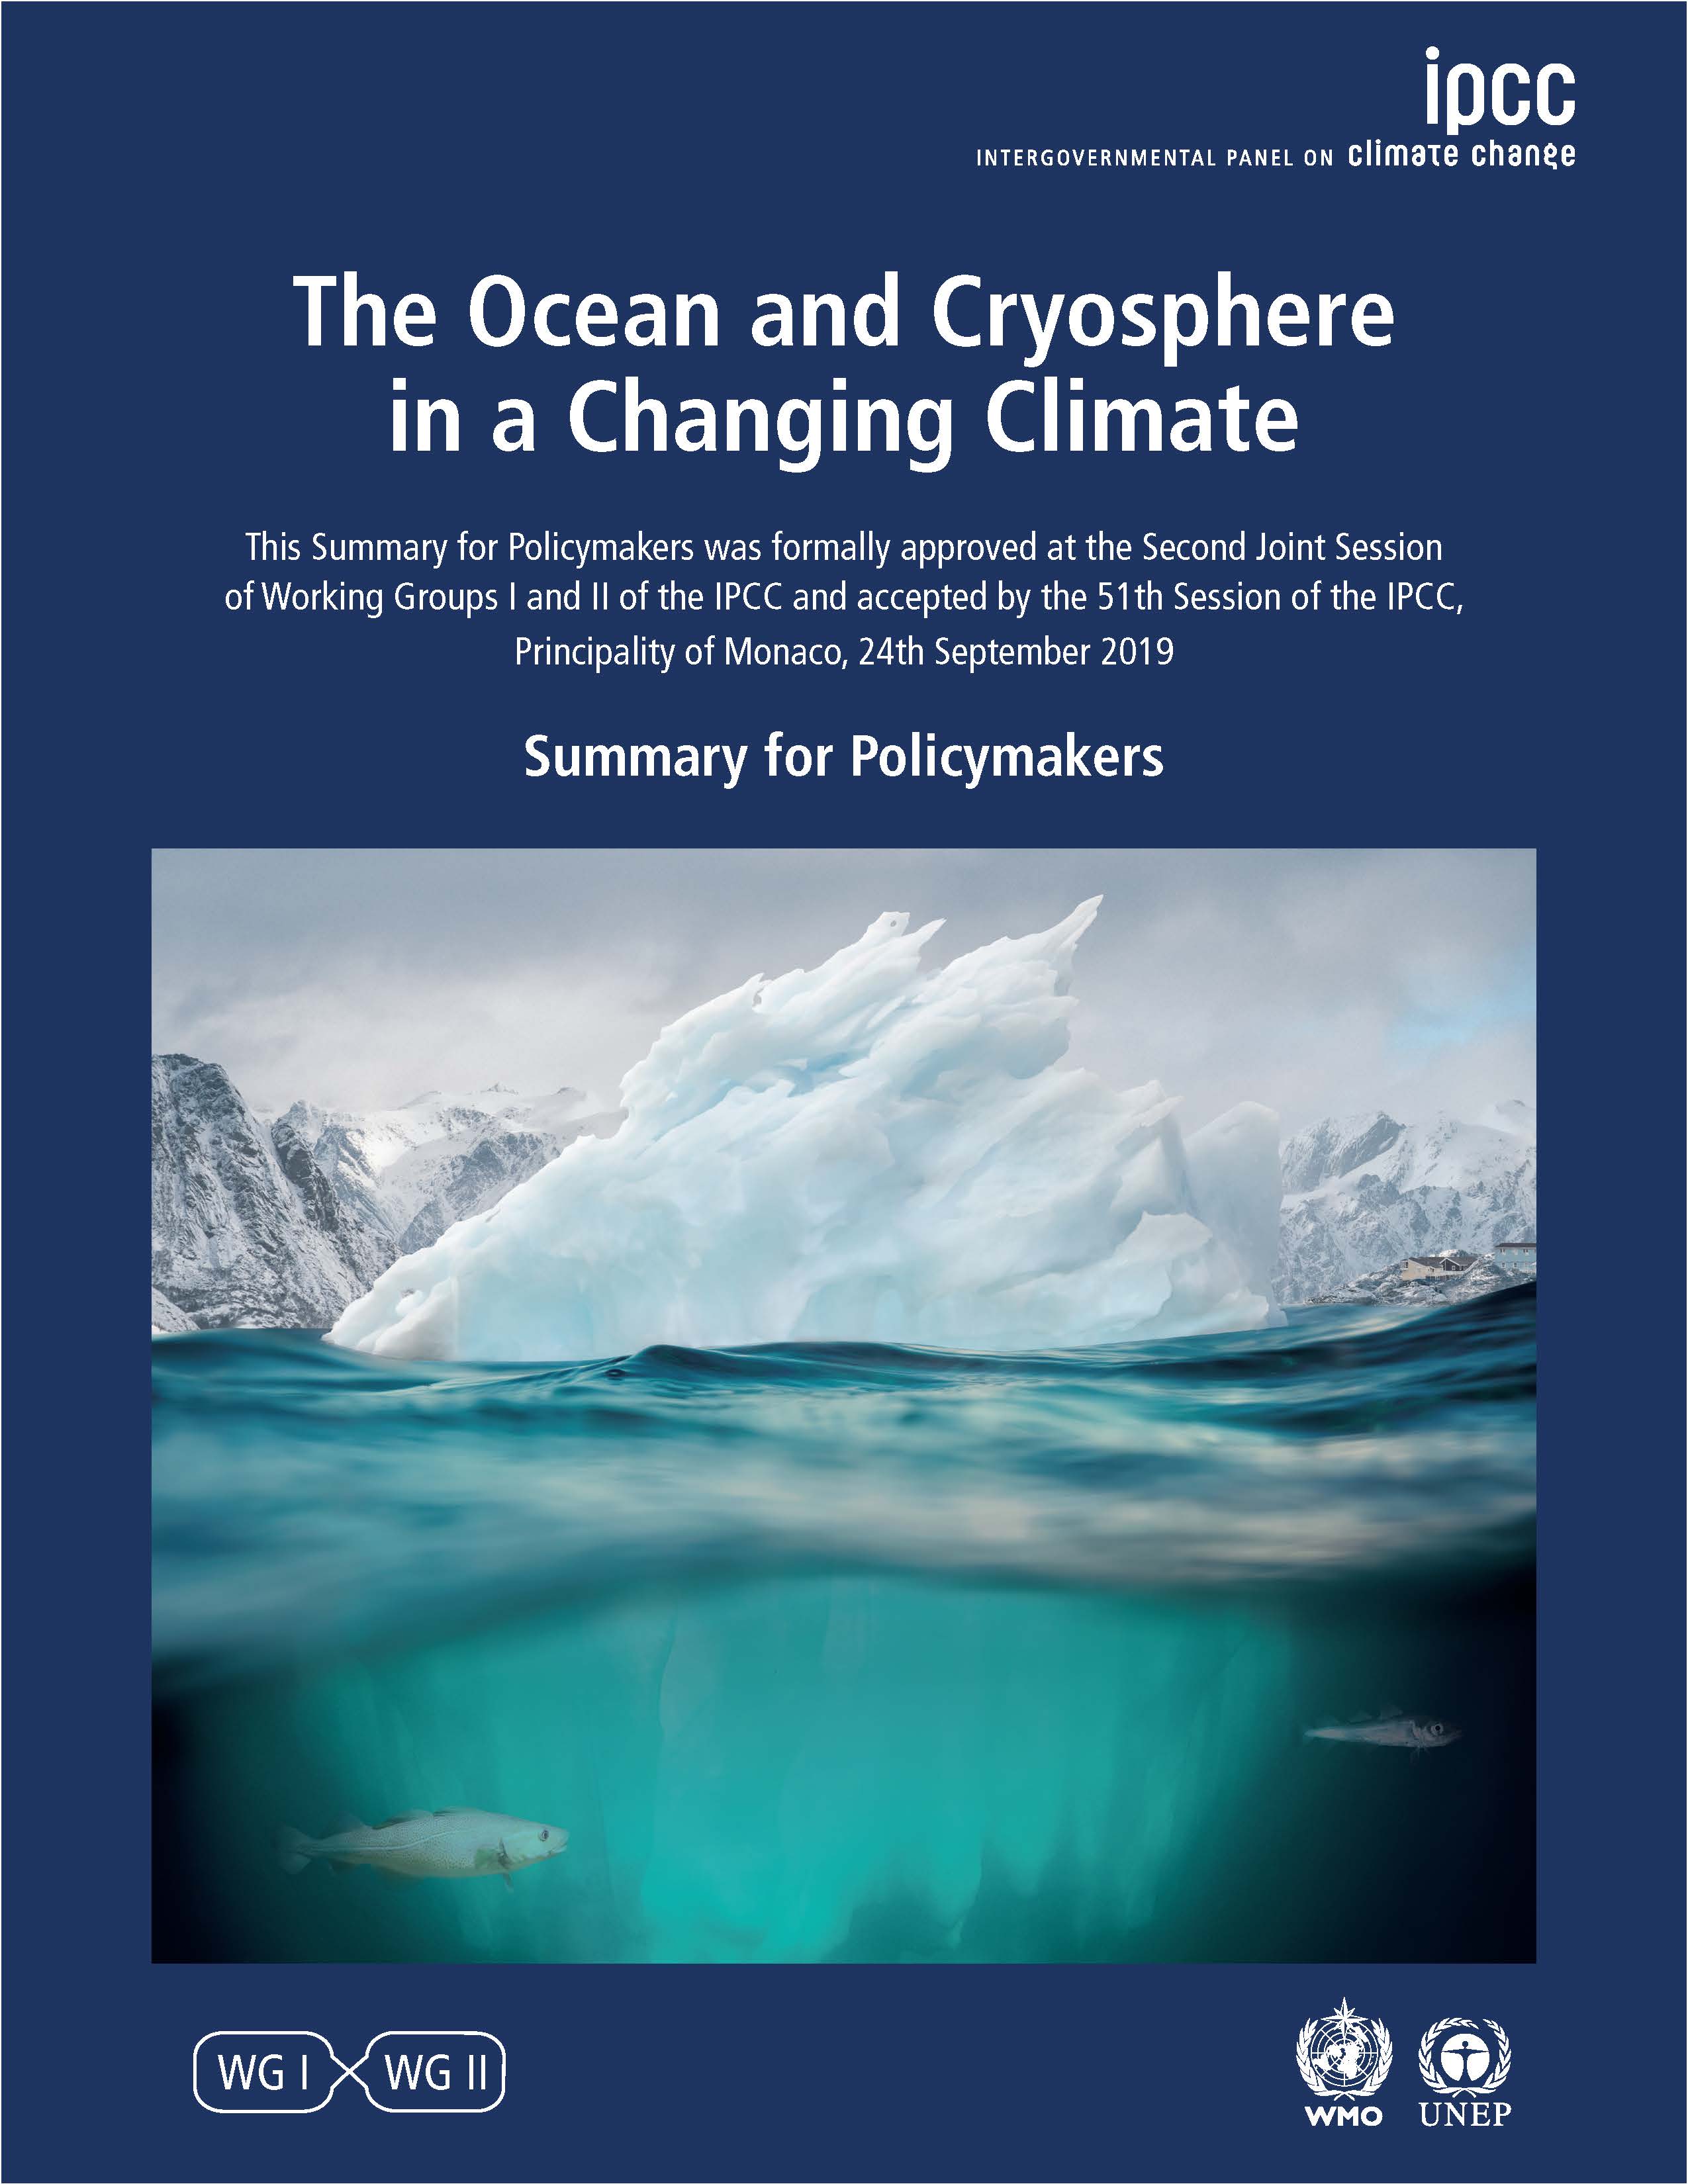 The IPCC Special Report on the Ocean and Cryosphere in a Changing